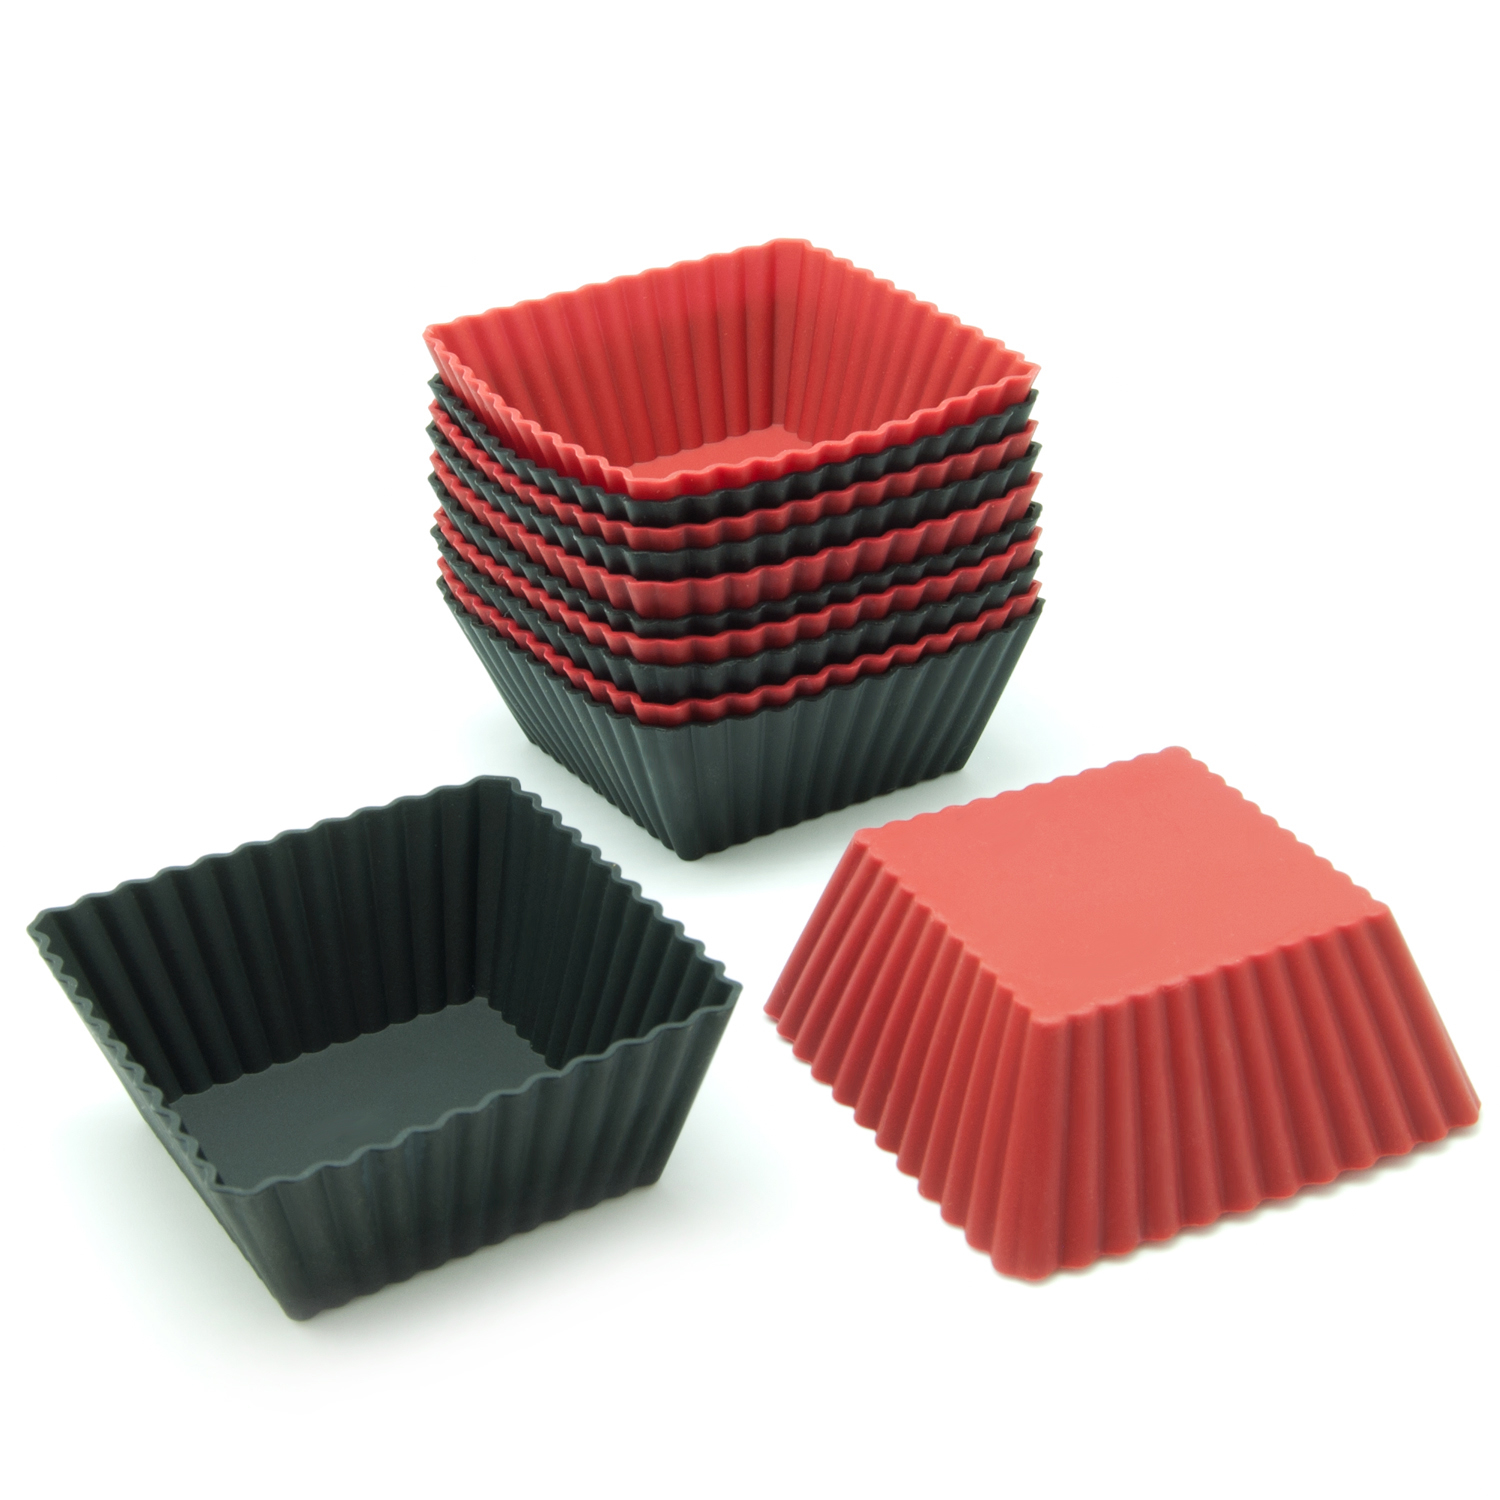 Freshware Silicone Cupcake Liners / Baking Cups - 12-Pack Muffin Molds, 2.5 inch Square, Red and Black Colors